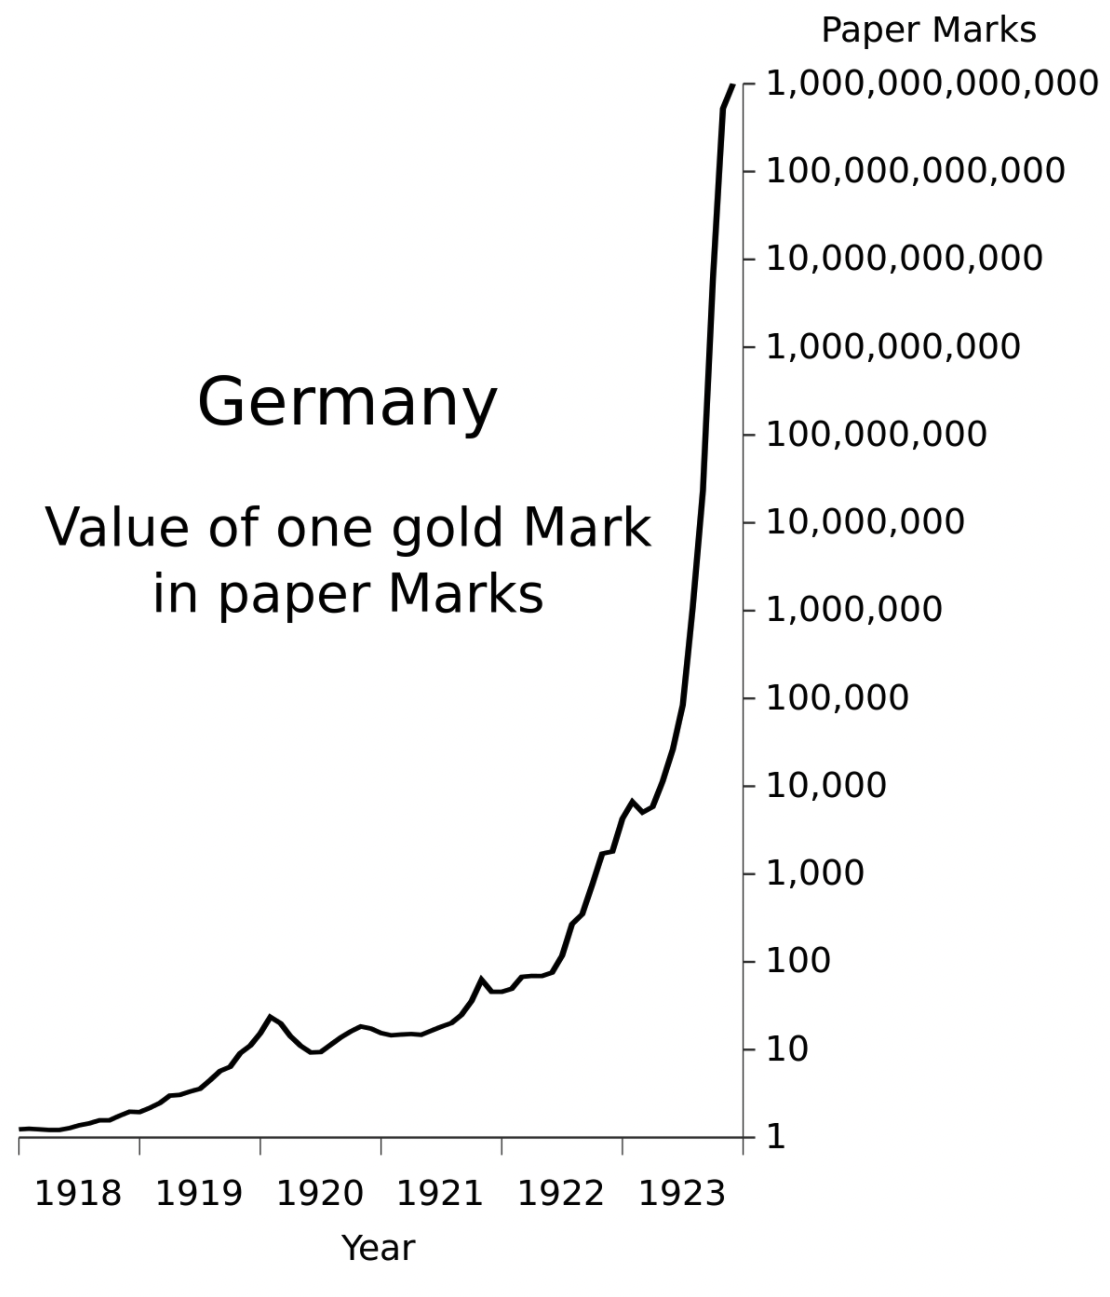 Hyperinflation in the Weimar Republic led to a complete wipeout of wealth following WWI